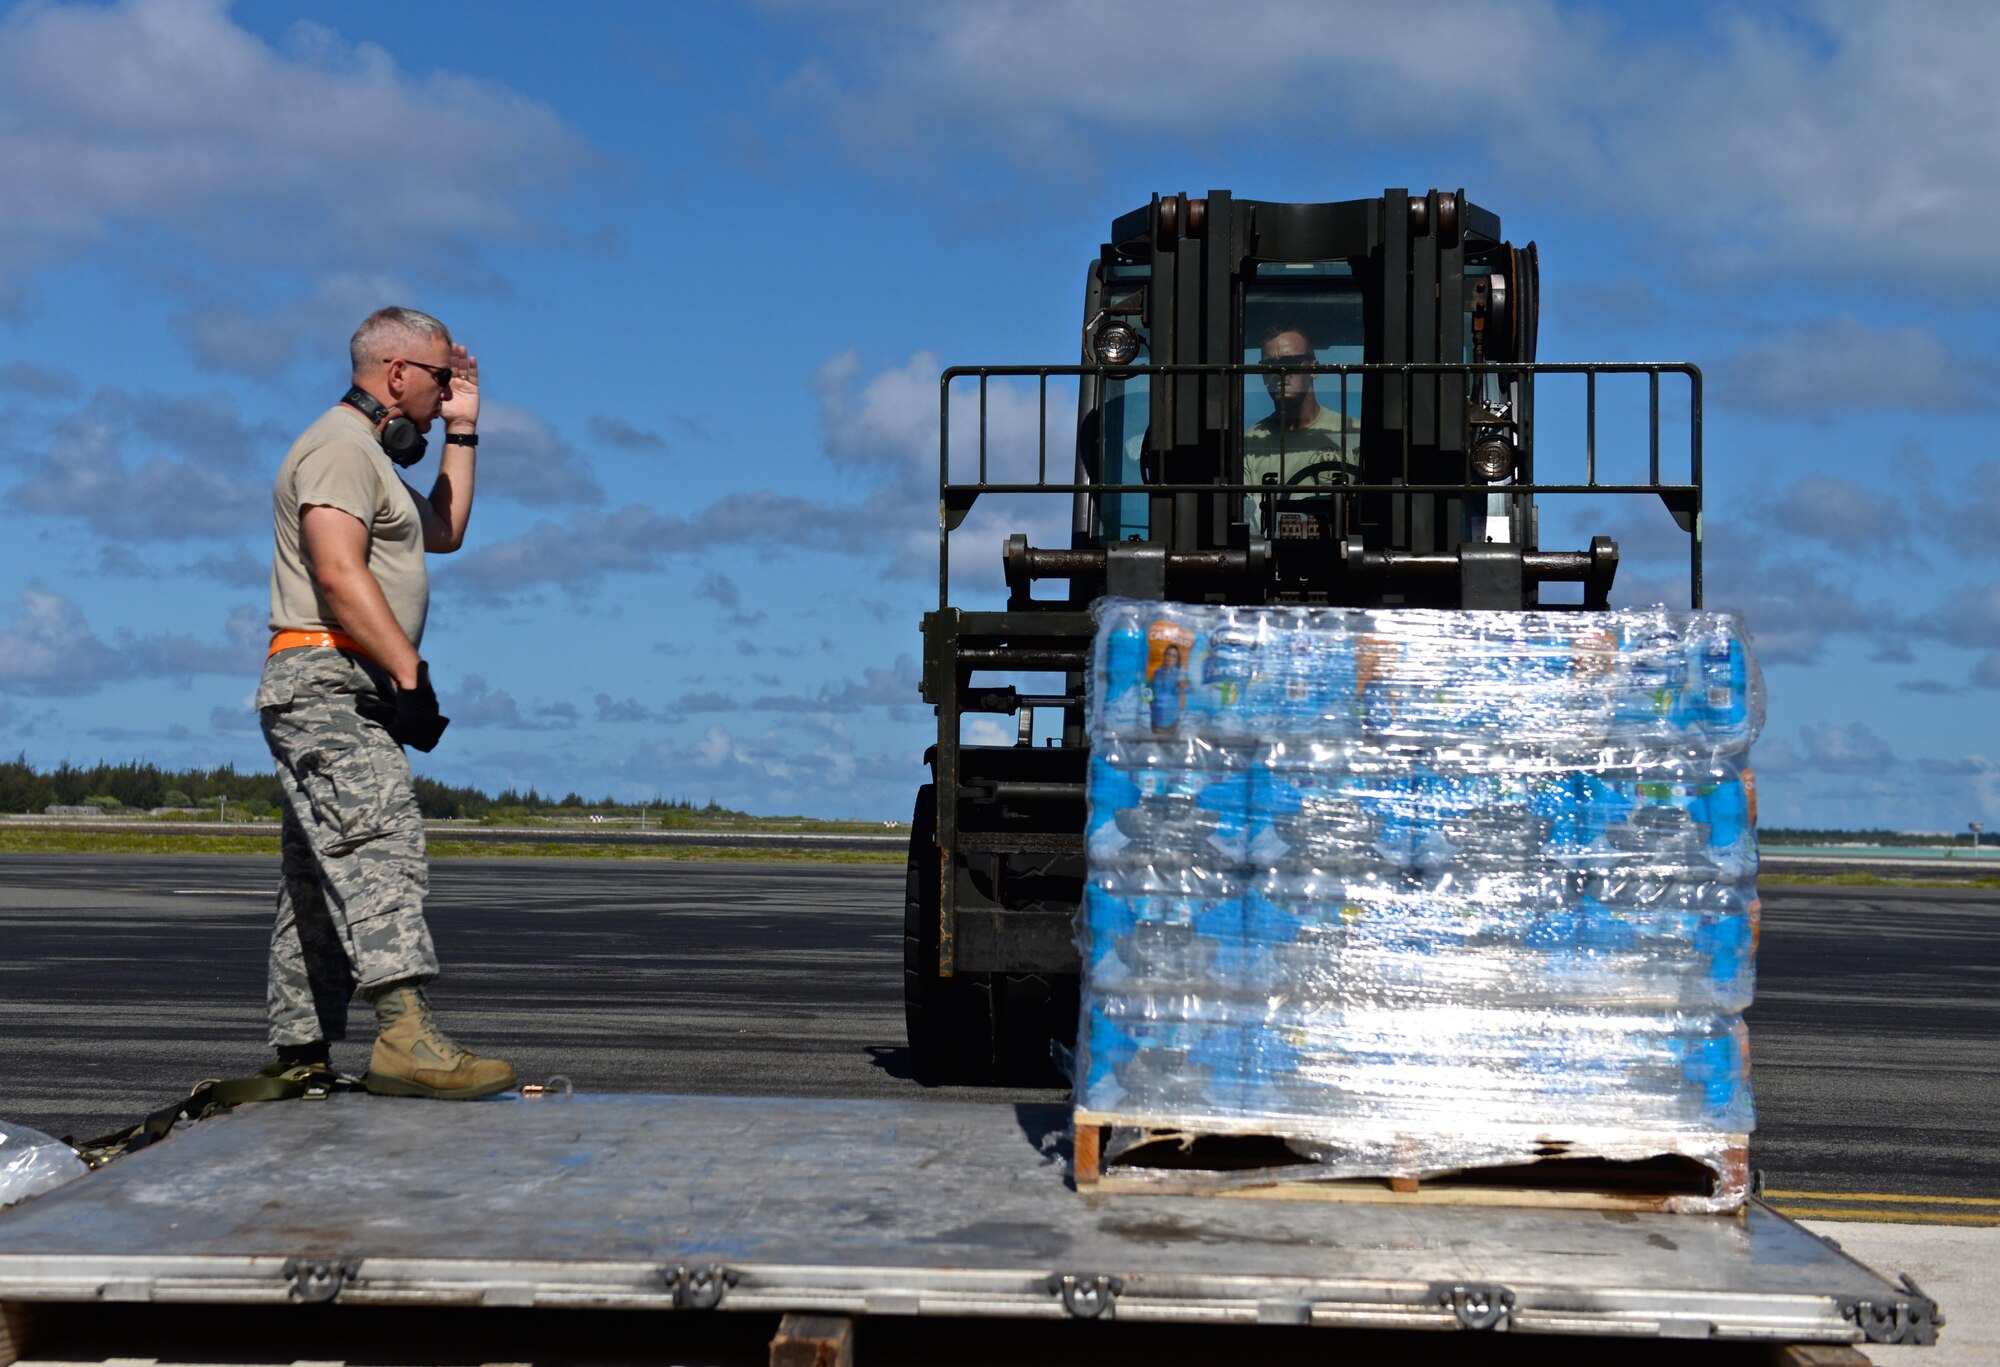 Master Sgt. Iain Morrison, the 36th Contingency Response Group superintendent of operations, plans and programs, guides Tech. Sgt. Randy Walgren, the 36th Mobility Response Squadron NCO in charge of aerial port operations, in moving drinking water rations July 20, 2015, on Wake Island Airfield. The 36th CRG deployed from Andersen Air Force Base, Guam, to assist in airfield storm recovery efforts after the small atoll was evacuated a few days earlier for Typhoon Halola. (U.S. Air Force photo/Senior Airman Alexander W. Riedel) 